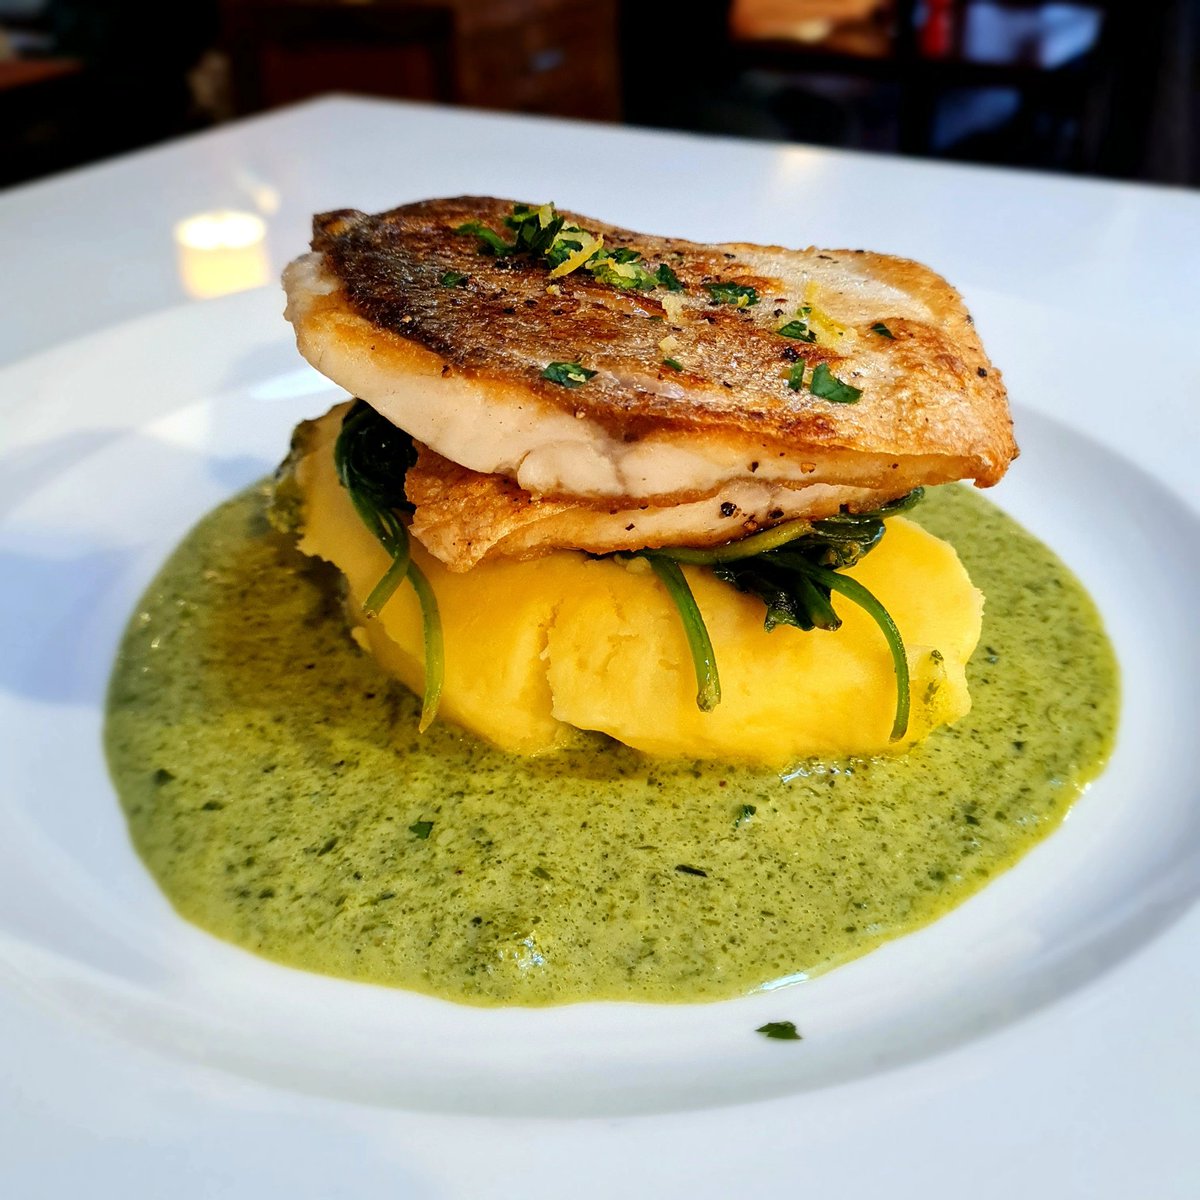 Pan-fried fillet of sea bass with a delicious wild garlic velouté on our menu now Thanks to Richard for letting us photograph his order, the first of the evening! #seabass #bass #fish #wildgarlic #fishsupper #FishFriday